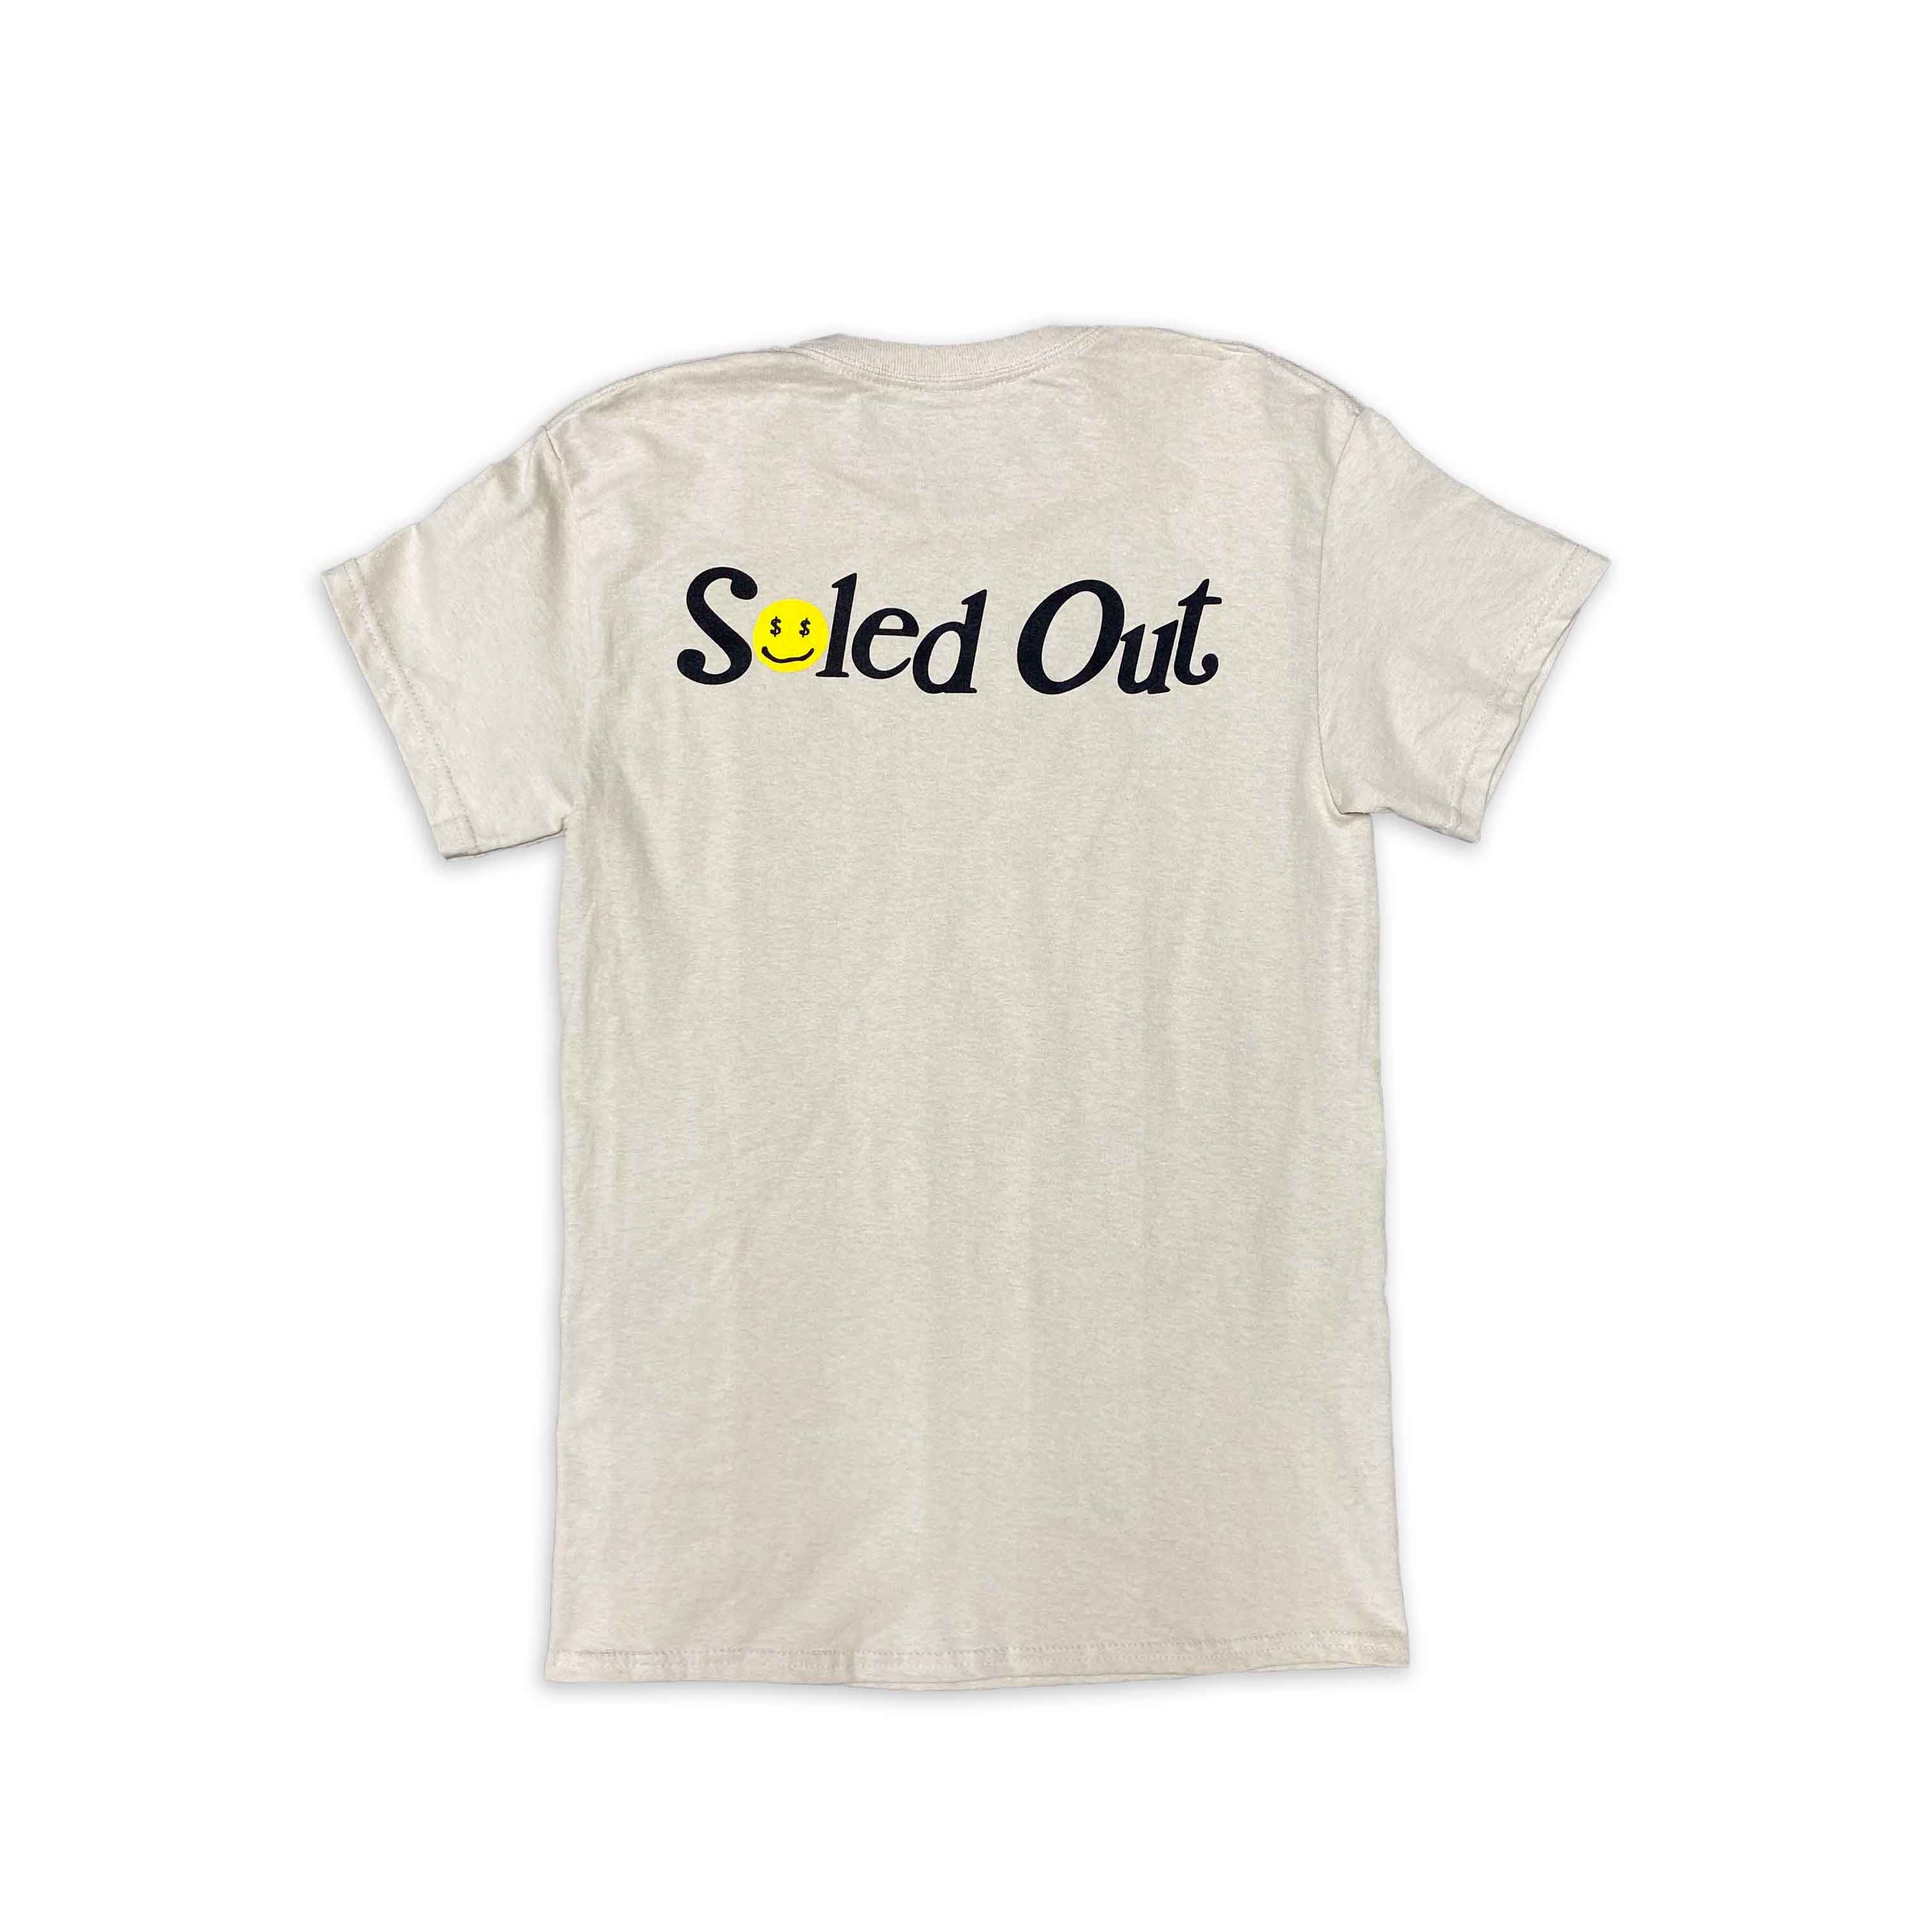 Soled Out T-Shirt "EXPENSIVE" Sand New Size L